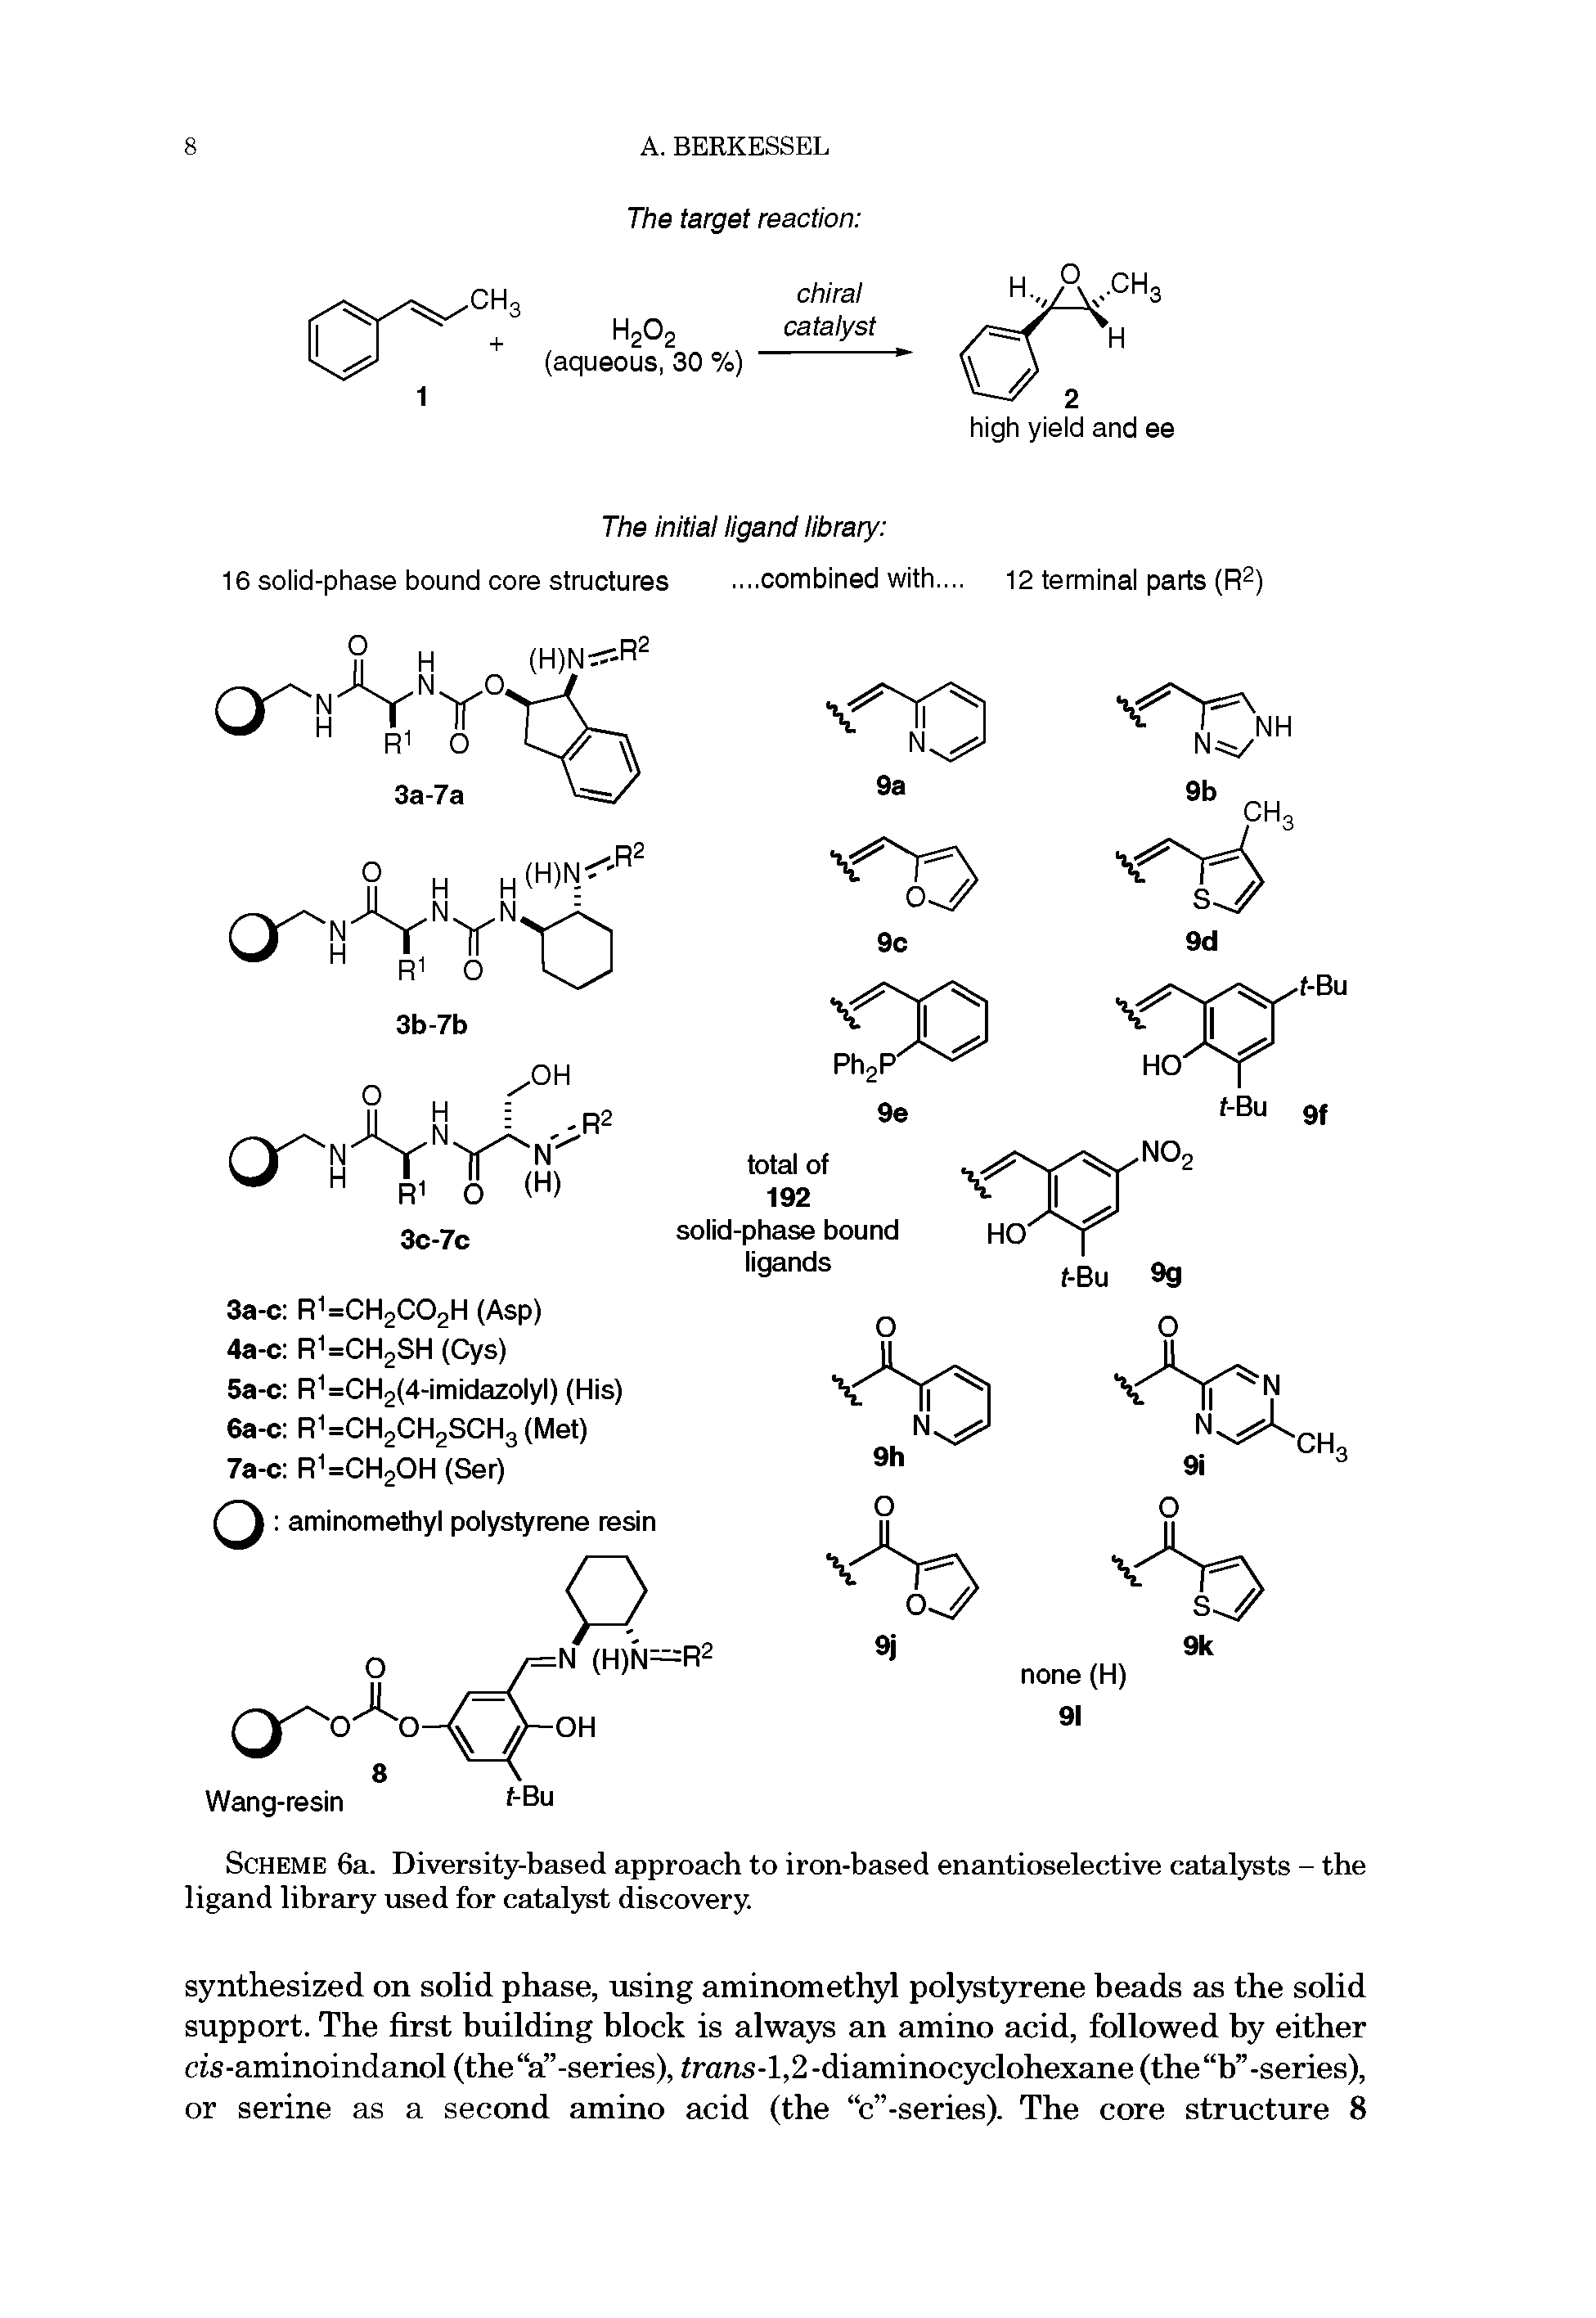 Scheme 6a. Diversity-based approach to iron-based enantioselective catalysts - the ligand library used for catalyst discovery.